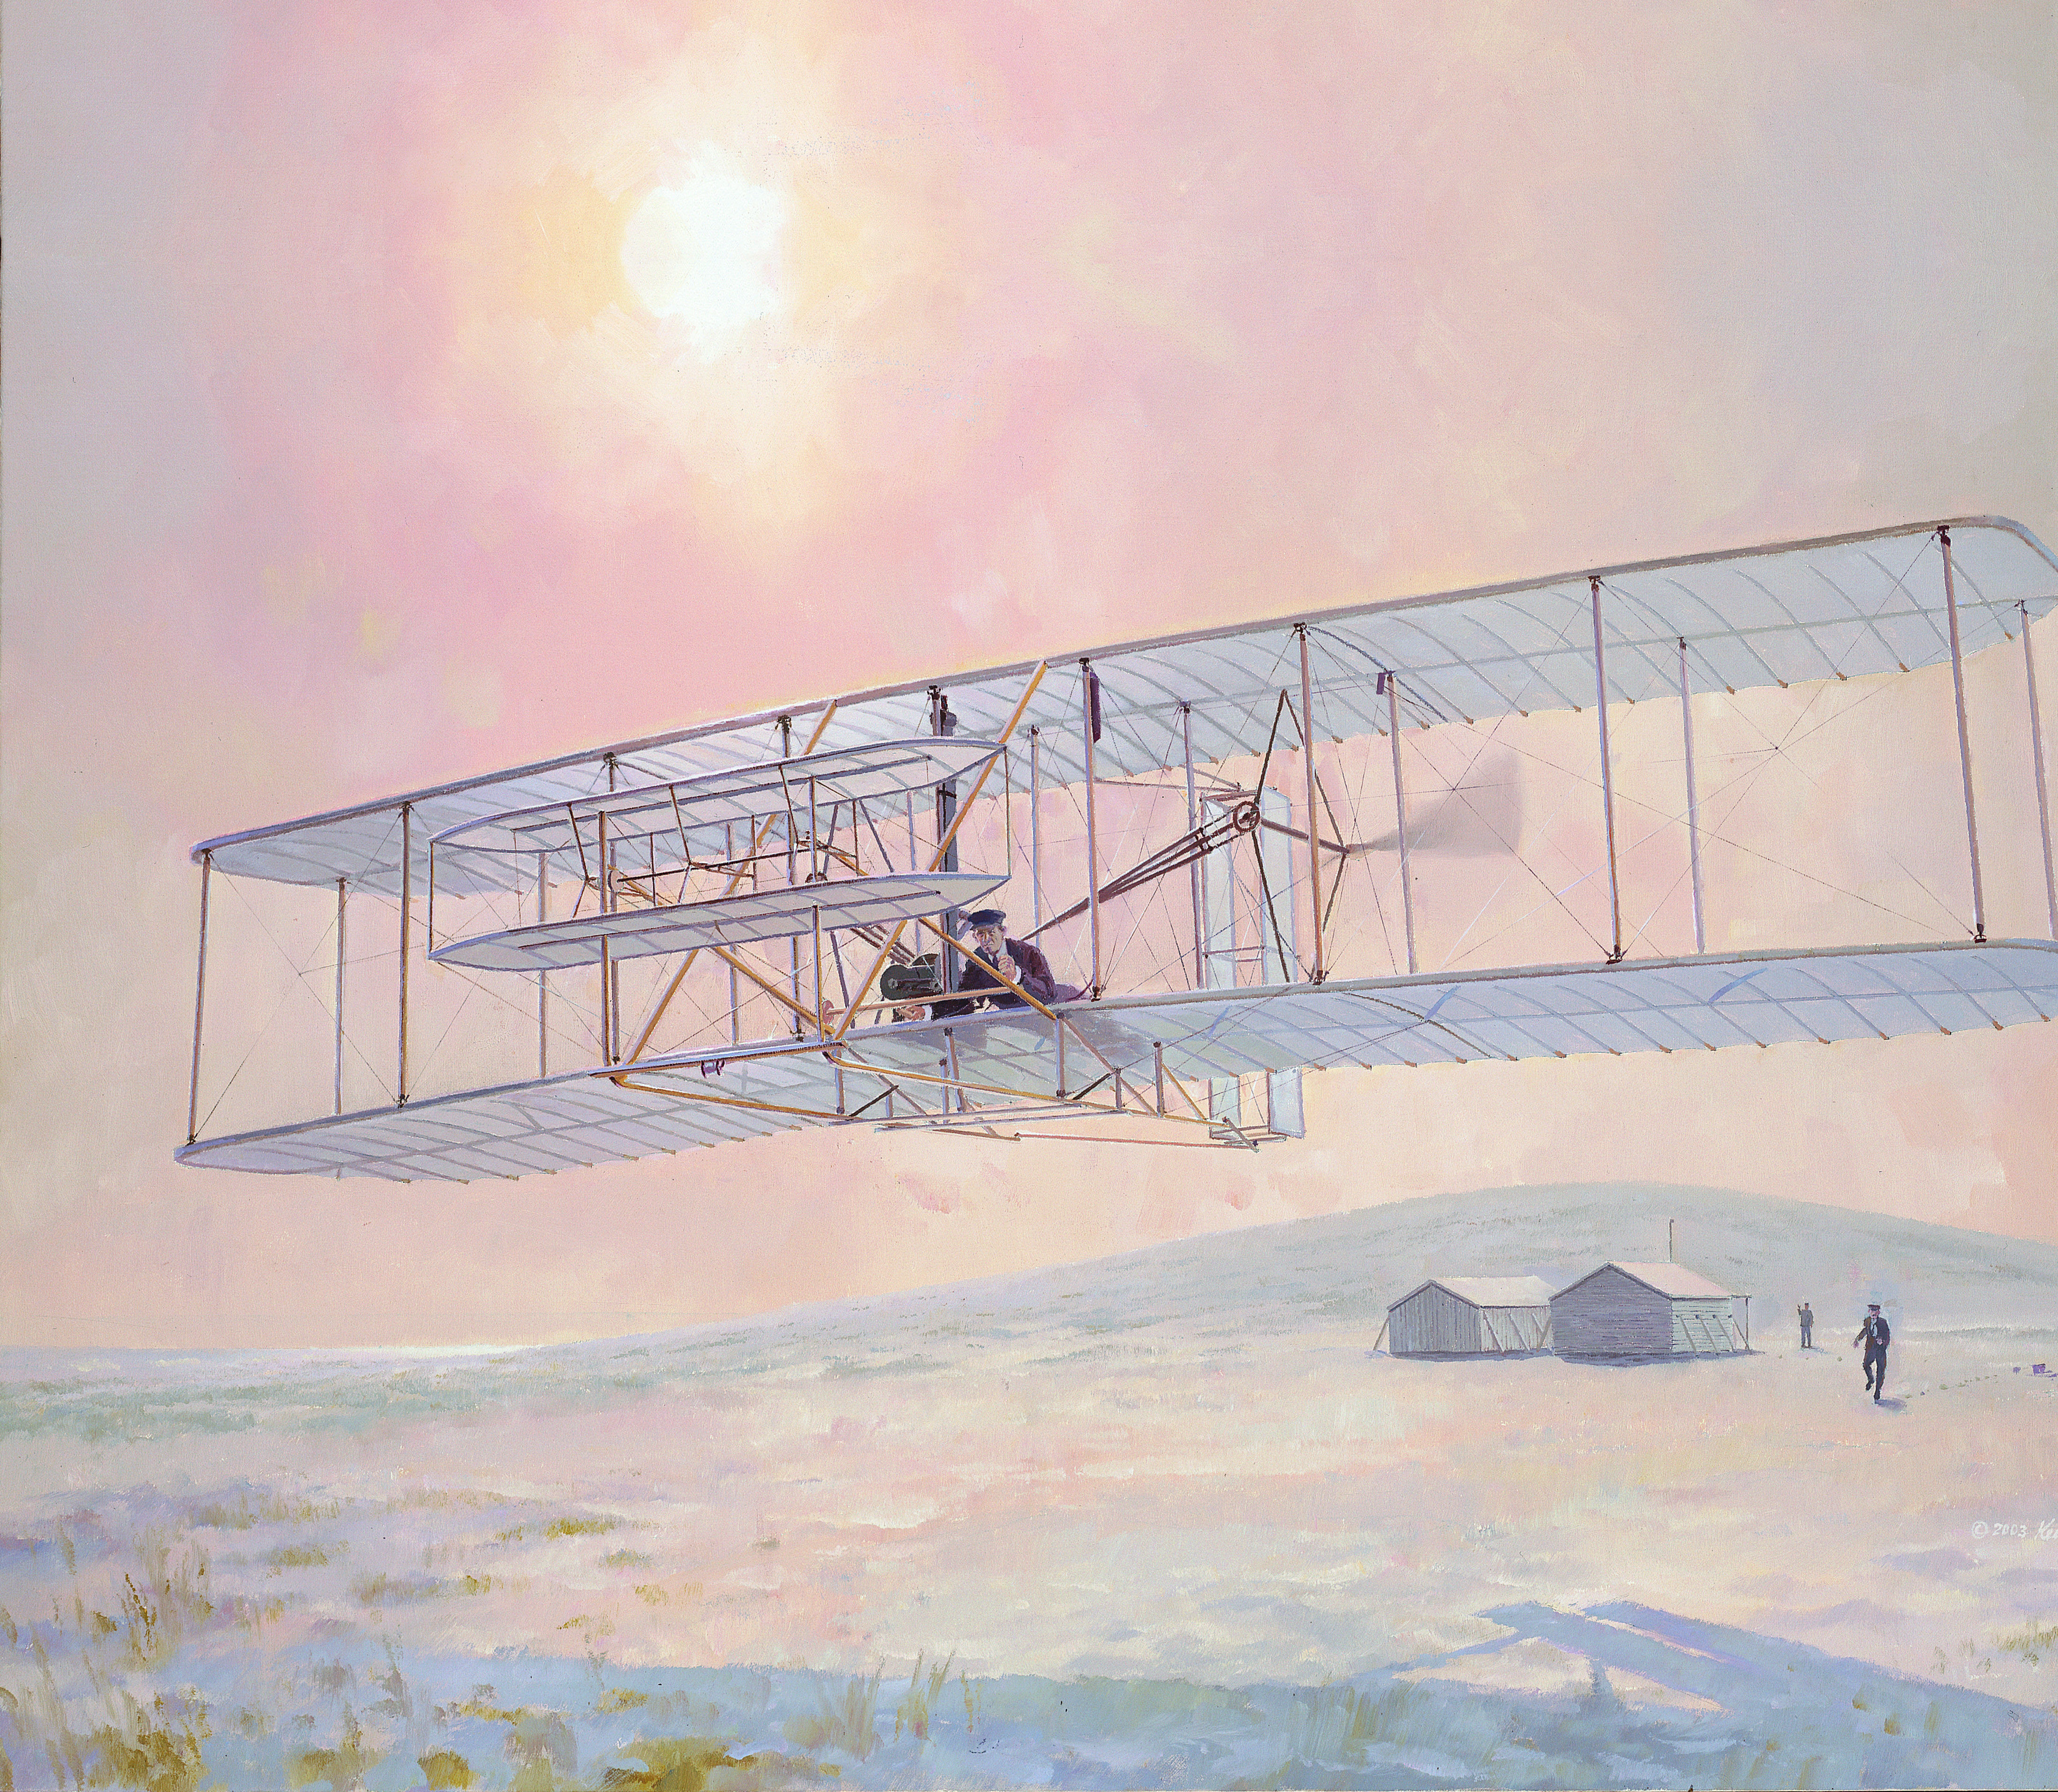 10 Free Wright Brothers  Wright Images  Pixabay